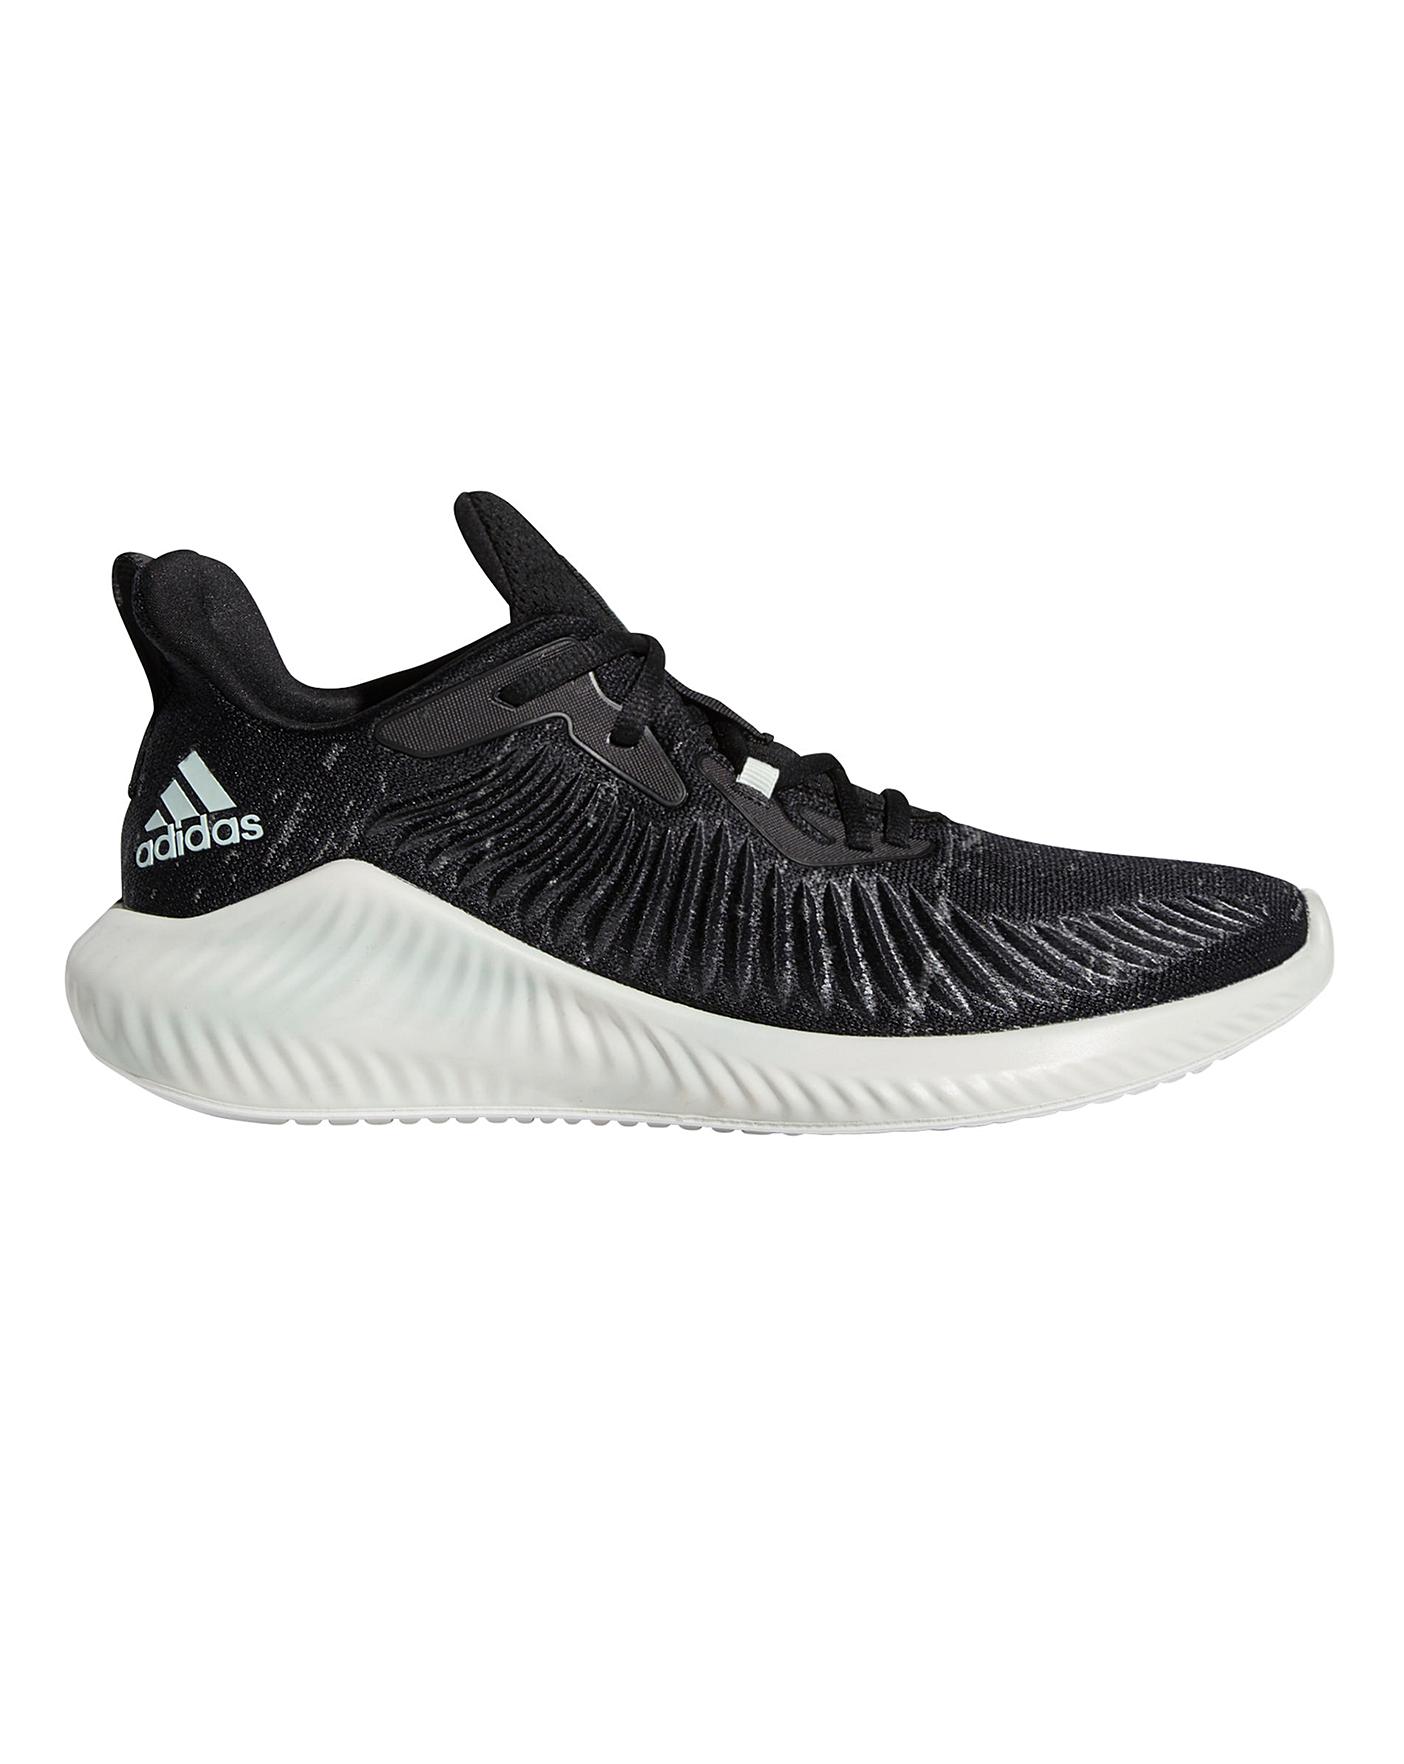 adidas Alphabounce Parley Trainers | J 